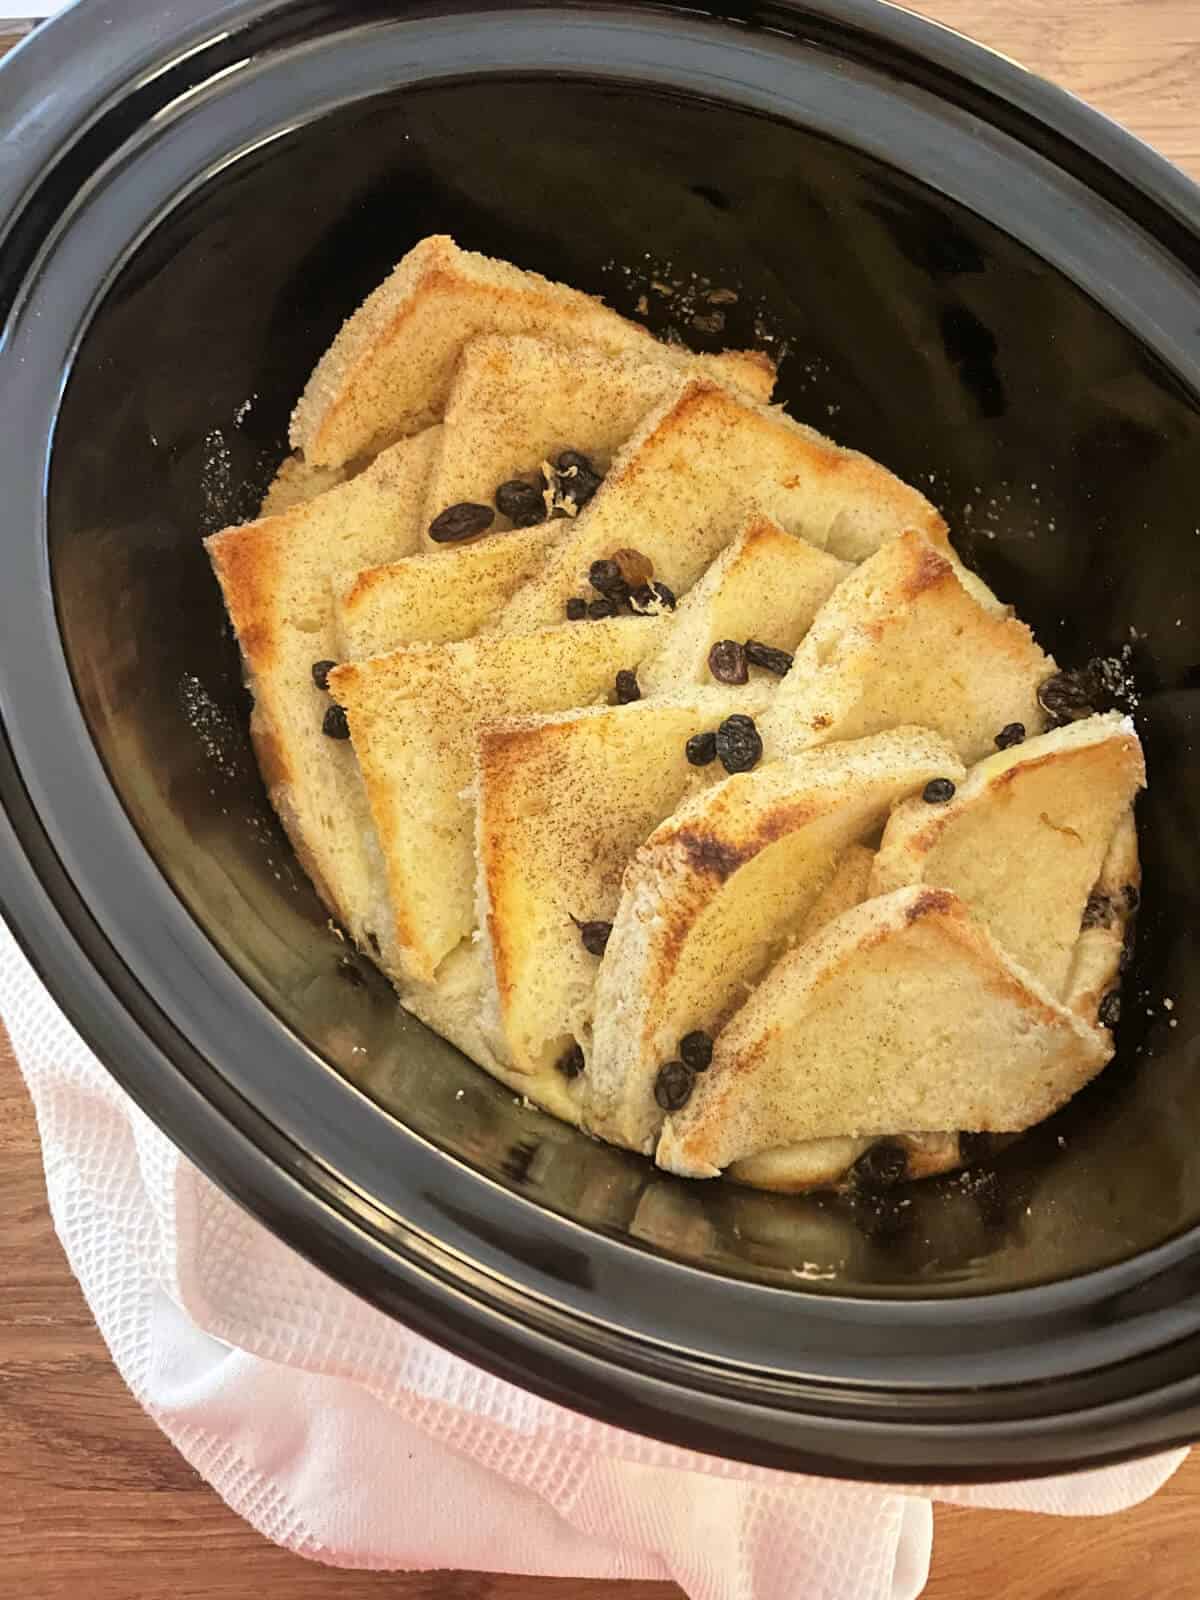 Baked bread and butter pudding in slow cooker pot, ready to serve.